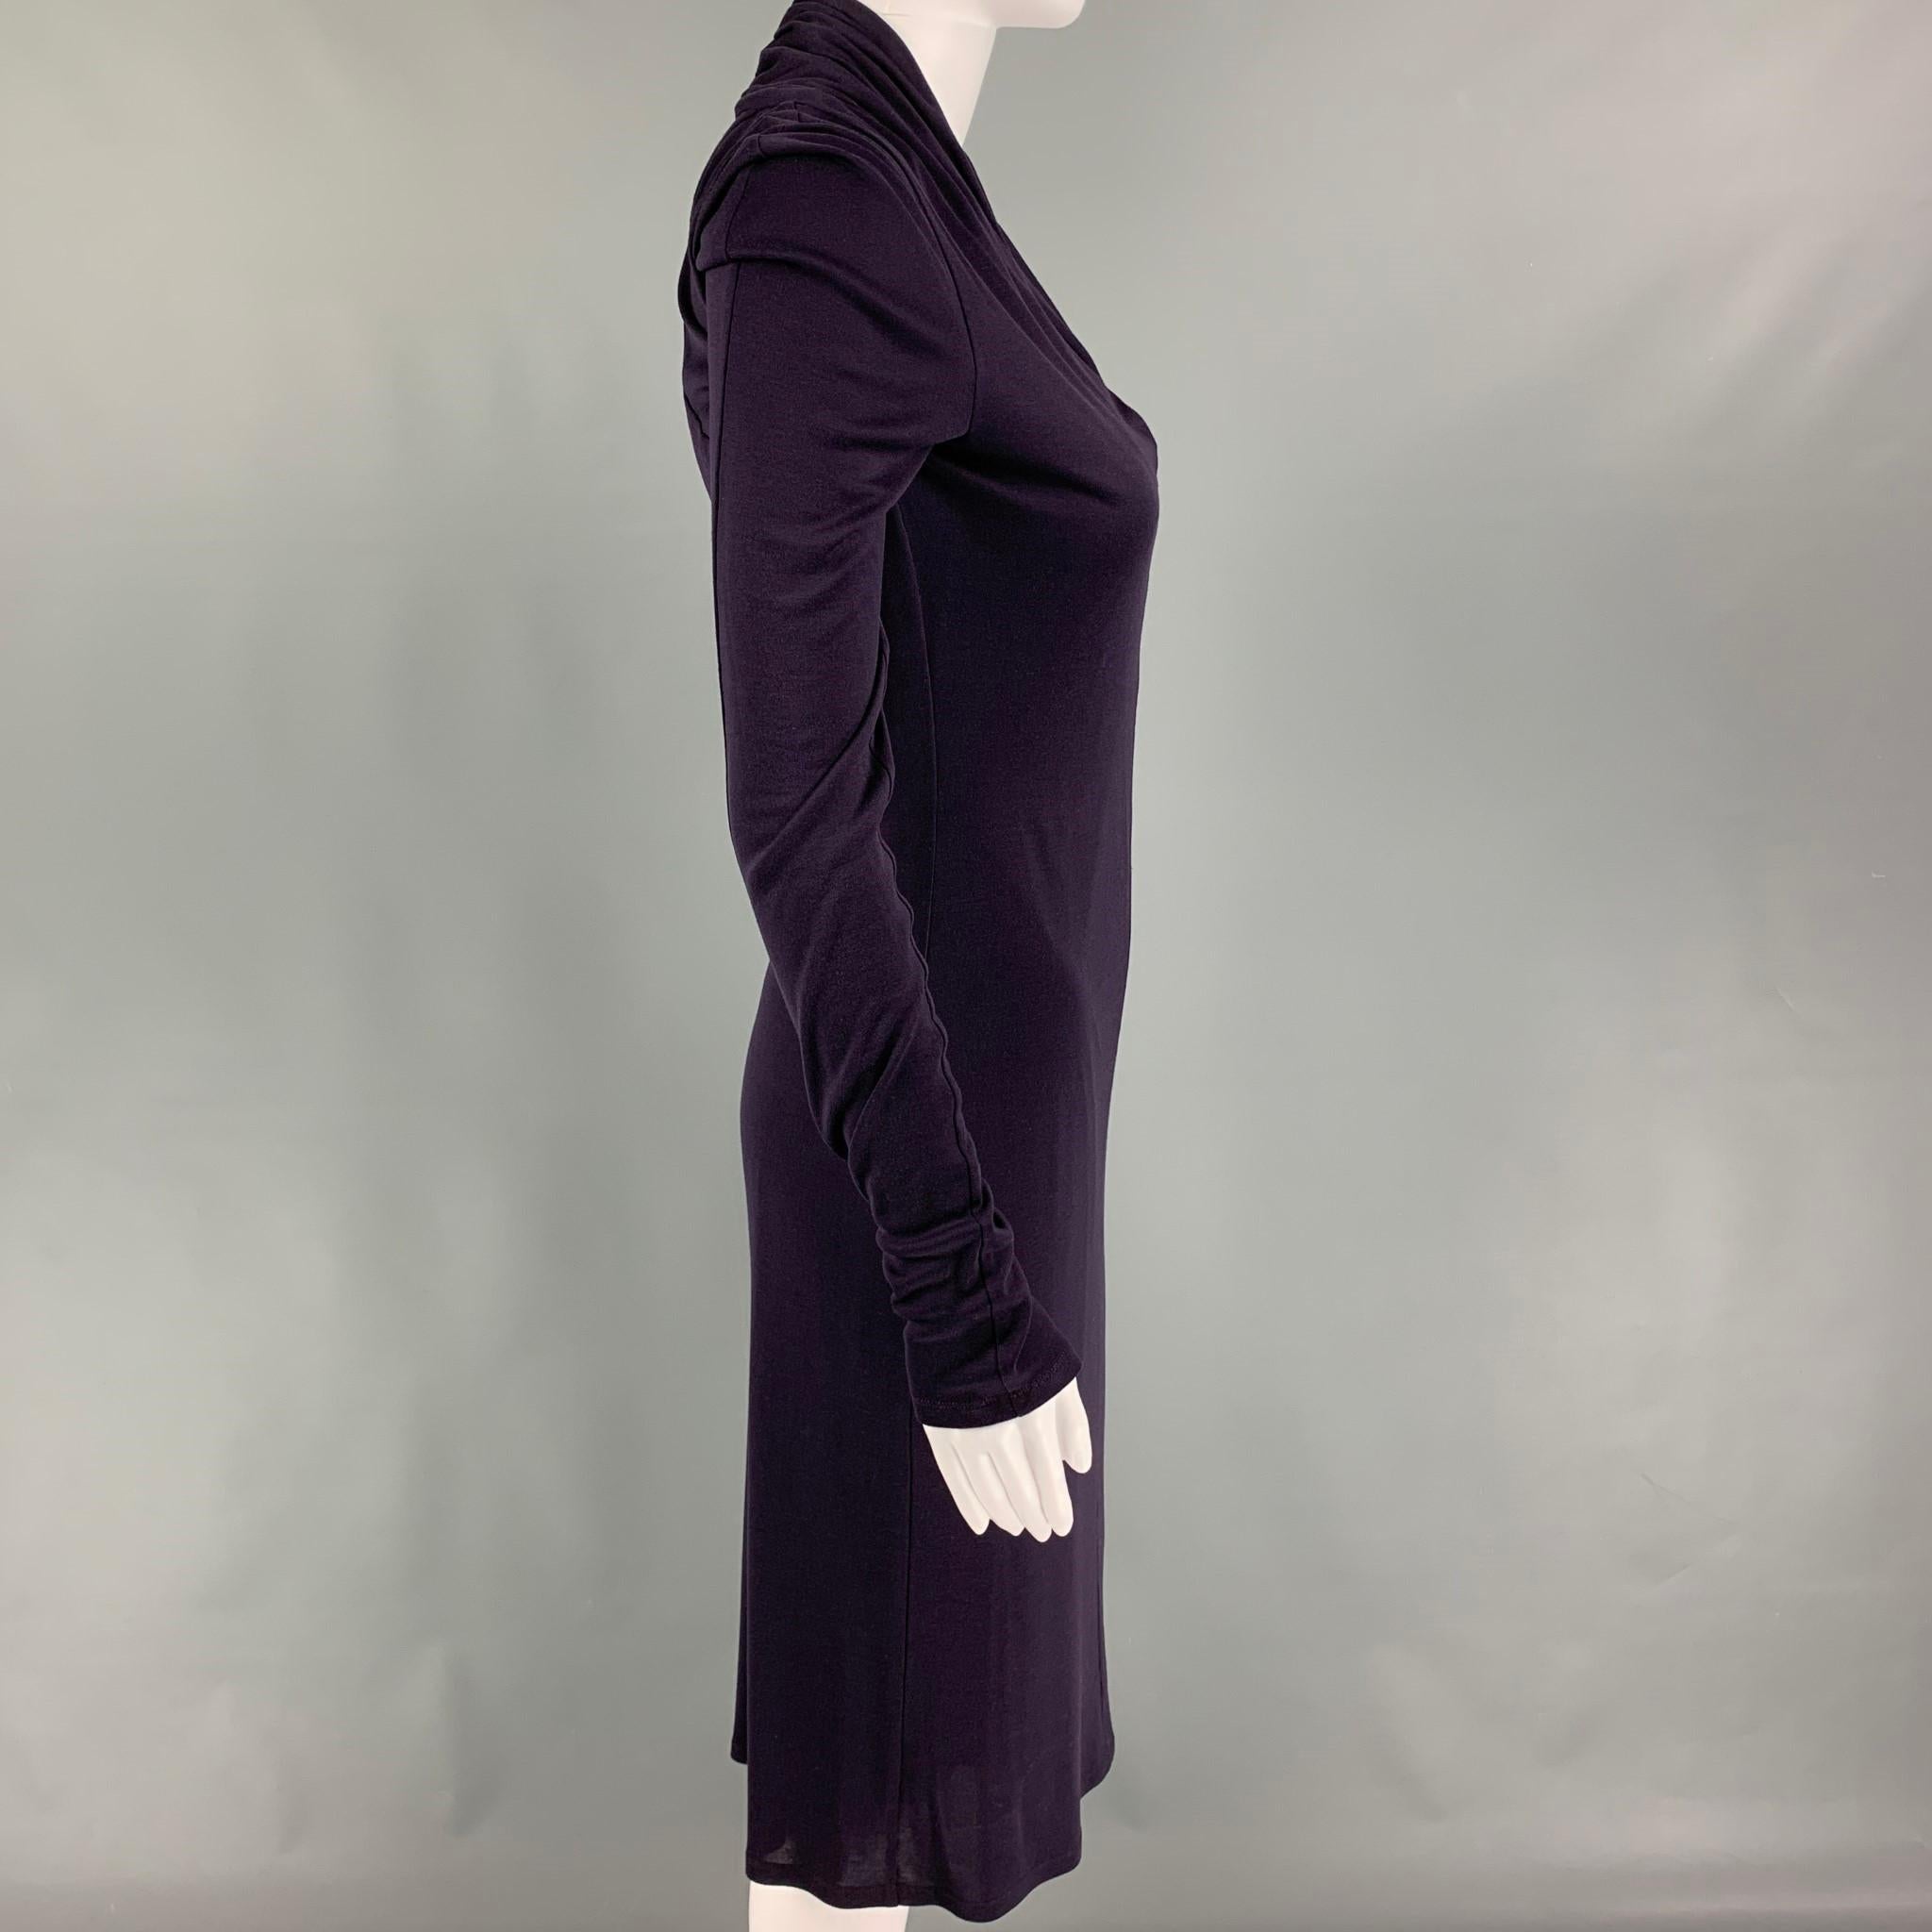 ALEXANDER McQUEEN dress comes in a purple viscose featuring long sleeve and a v-neck. Made in Italy. 

Very Good Pre-Owned Condition. light wear at front. As-is.
Marked: 42
Original Retail Price: $1,150.00

Measurements:

Shoulder: 16 in.
Bust: 30